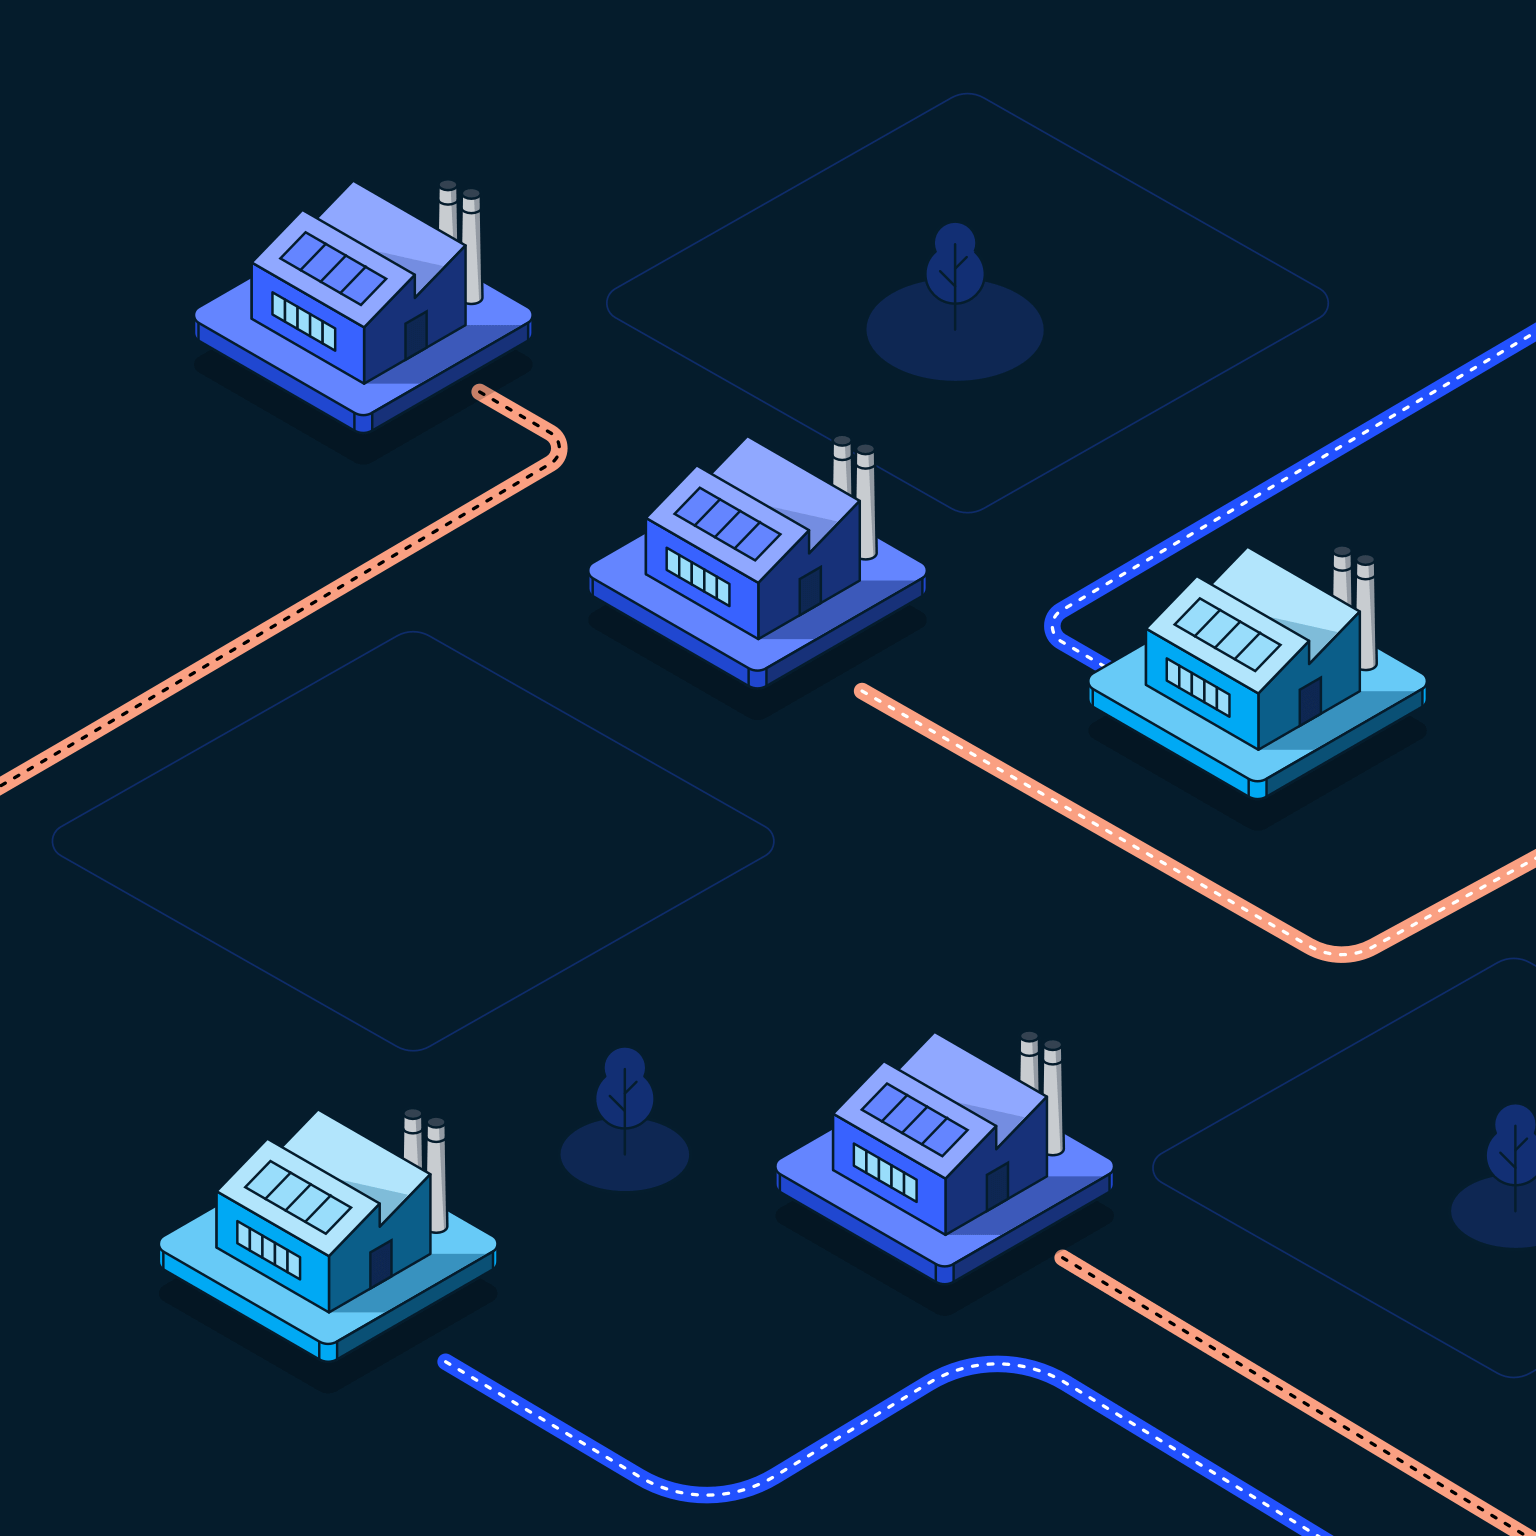 Factories interconnected by digital cables - illustration